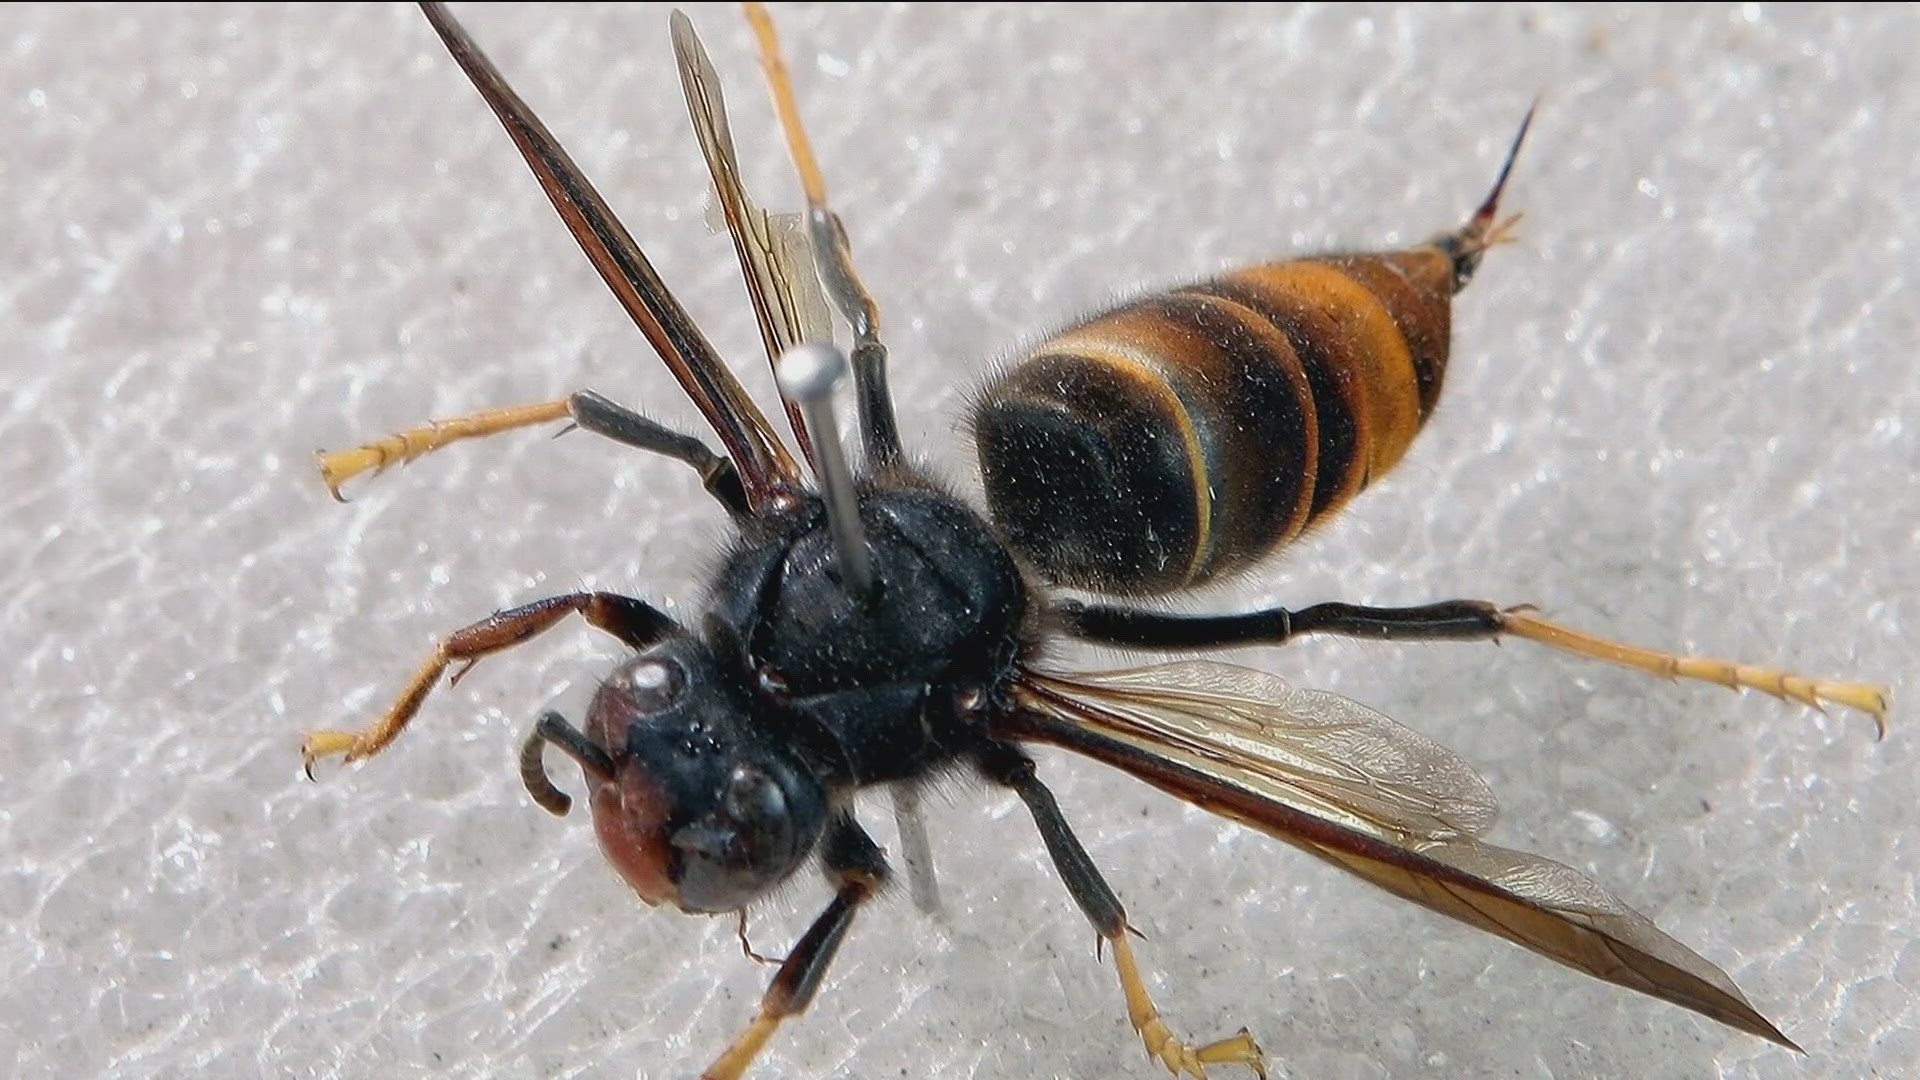 The yellow-legged hornet, or Asian hornet (Vespa velutina), was discovered by a beekeeper in Savannah.